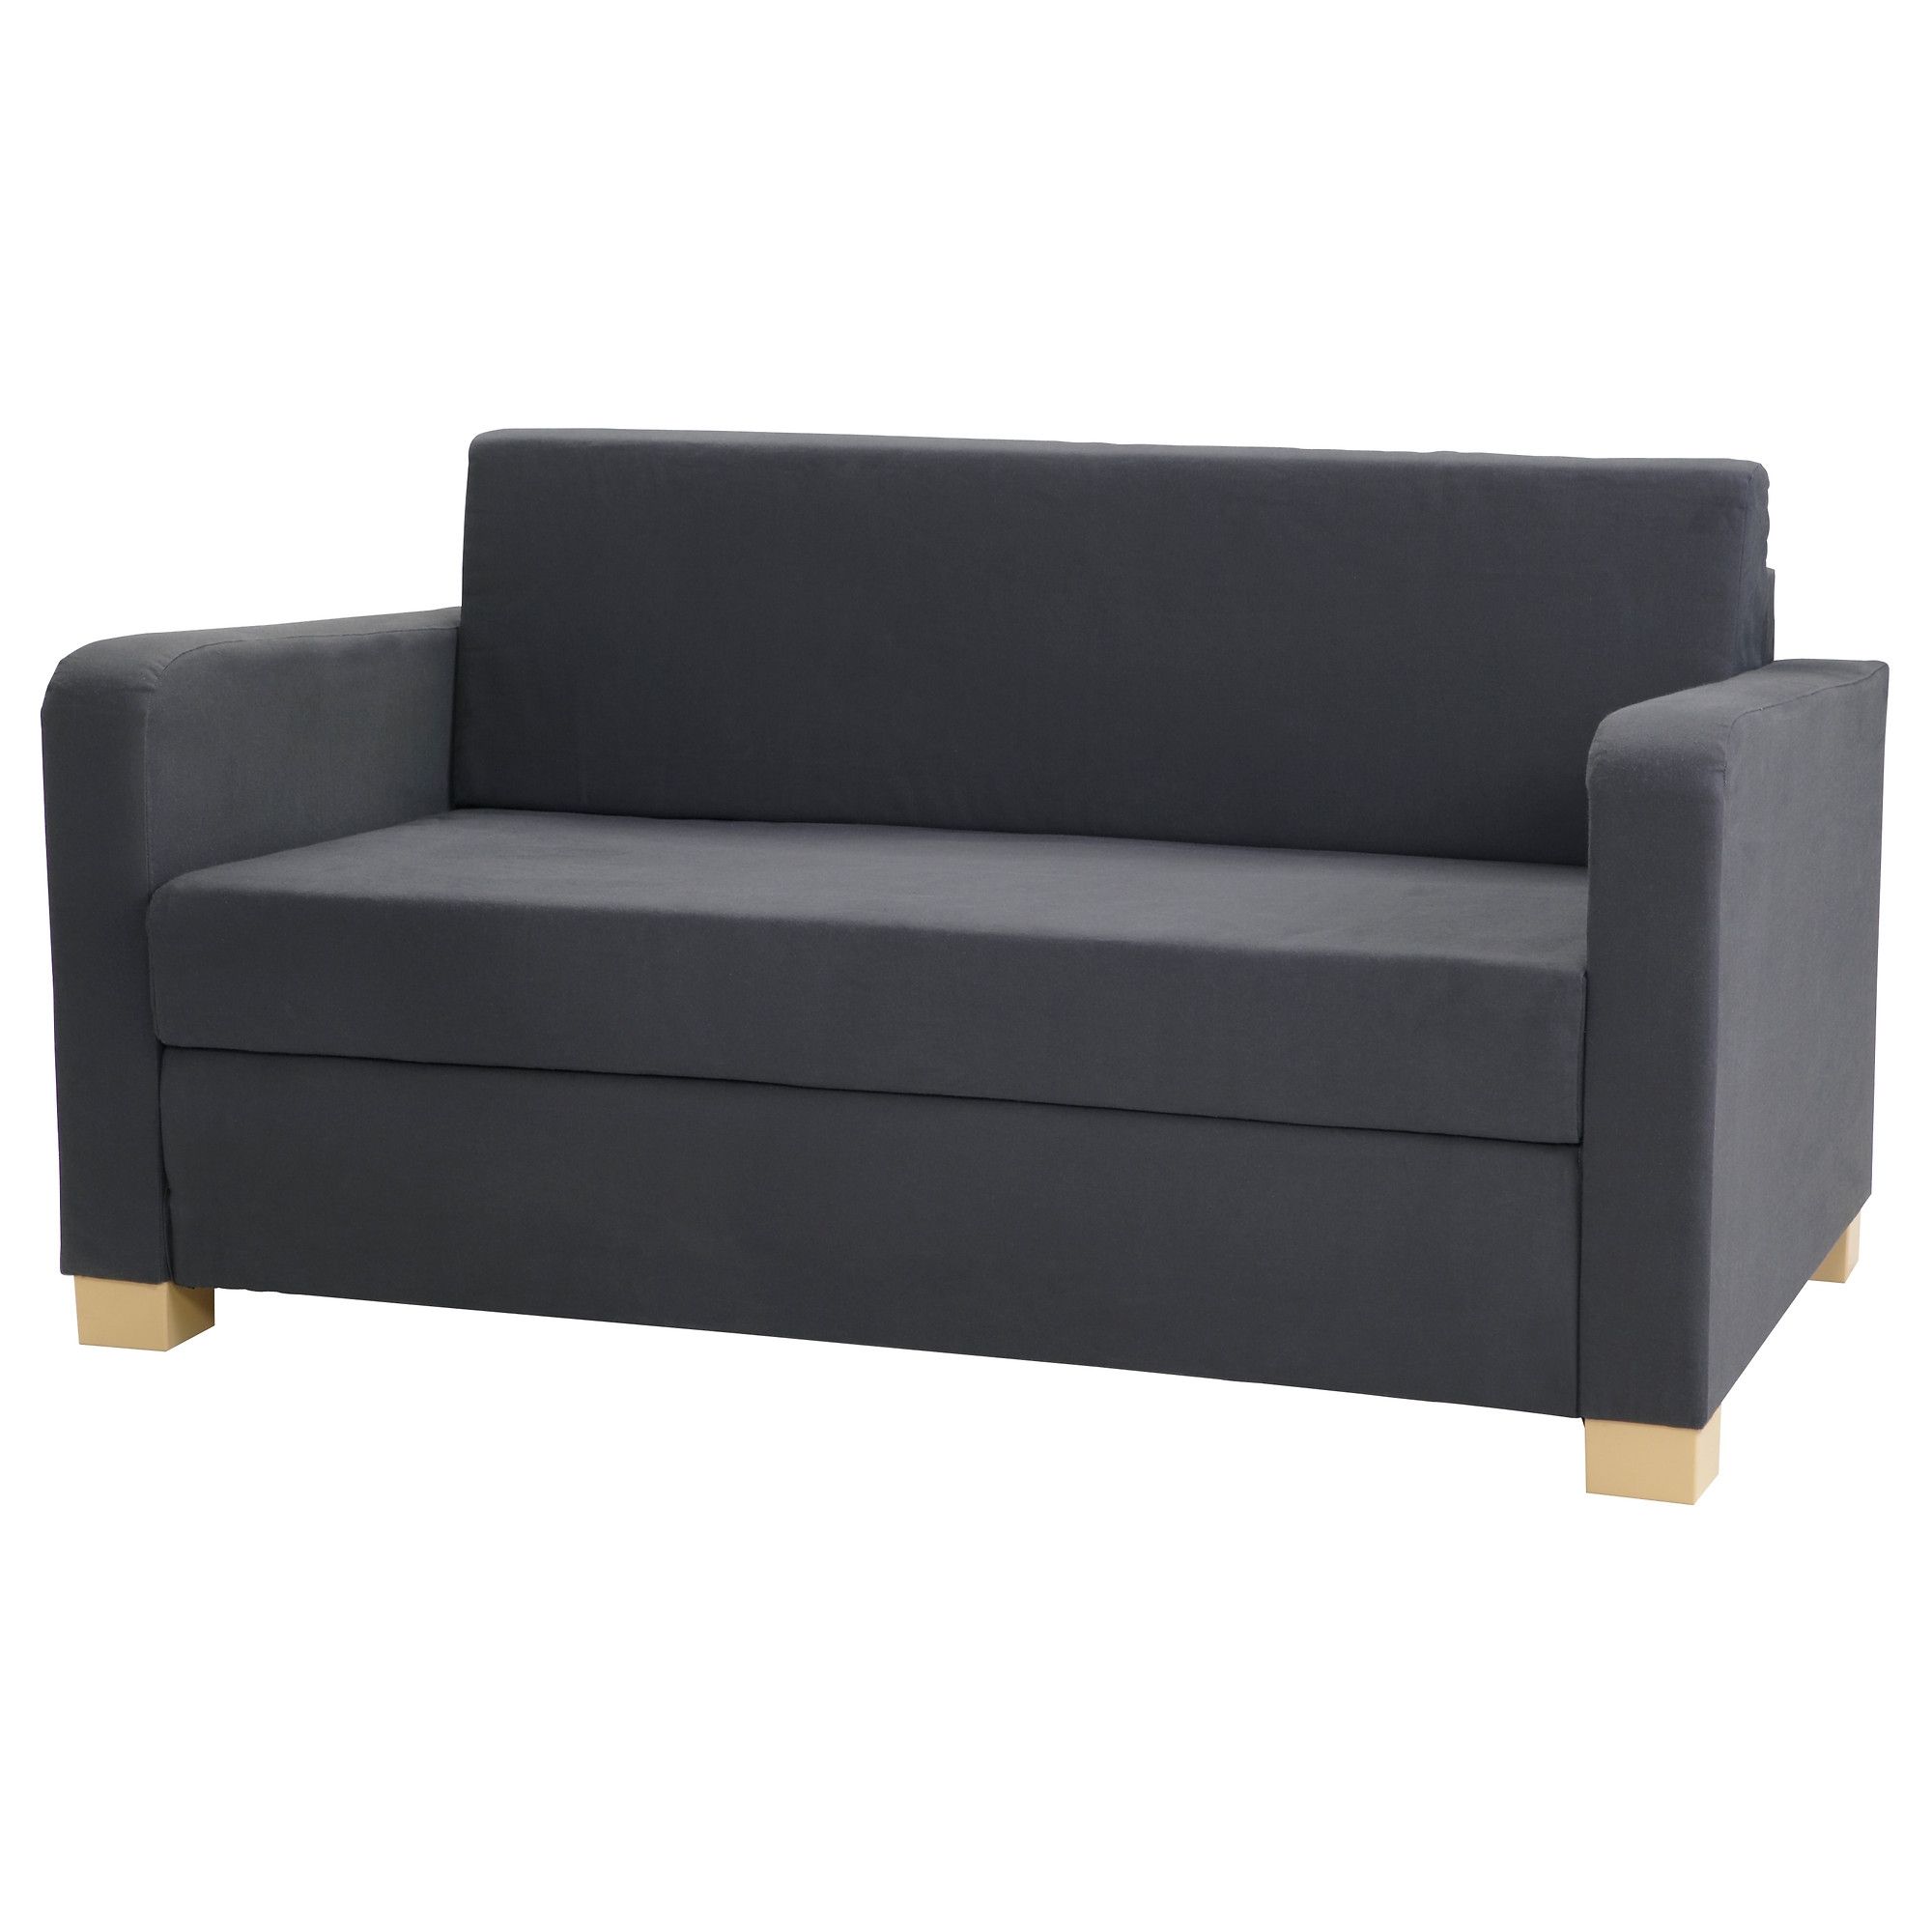 Solsta Sleeper Sofa Ikea For Convertible Sofa Chair Bed (View 13 of 15)